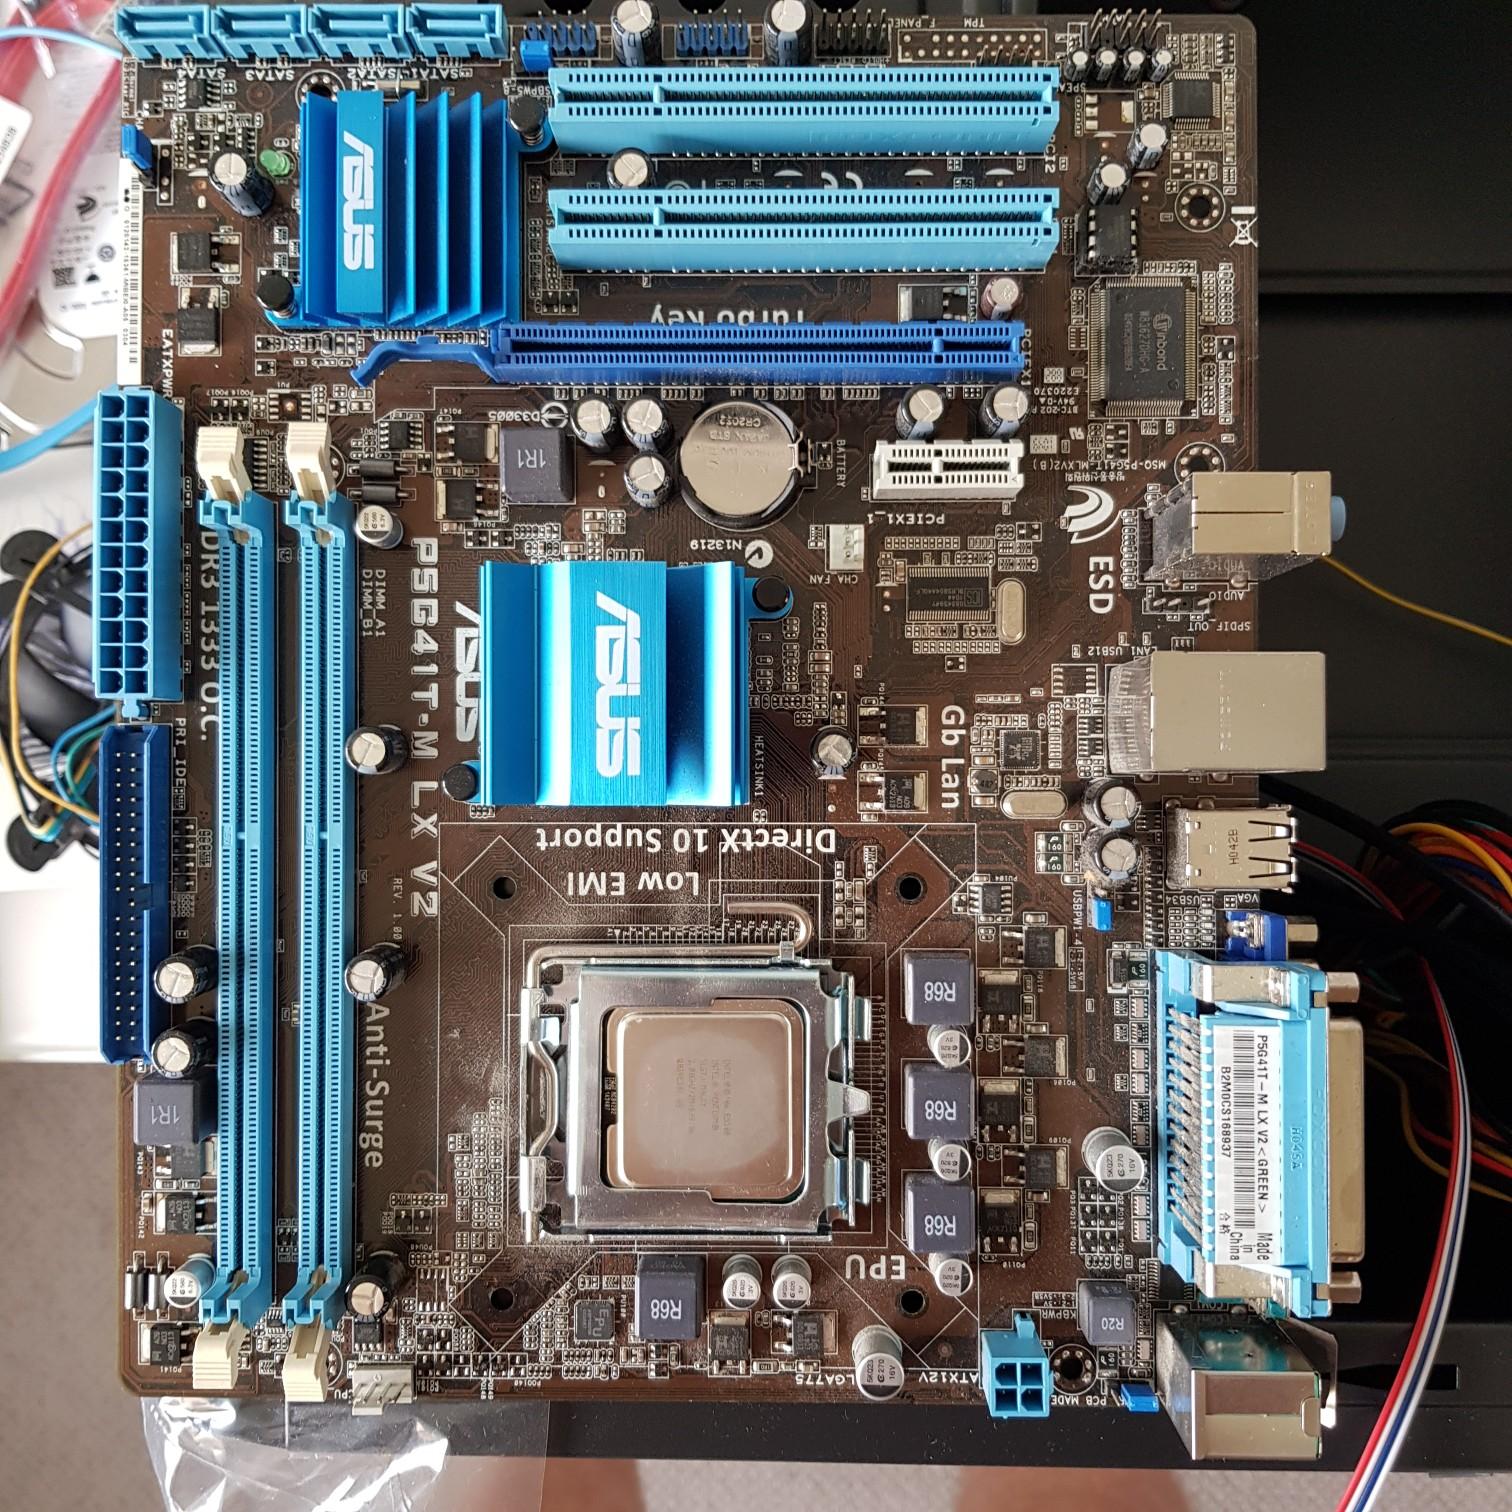 Asus Motherboard, 4gb ram, hard drive & cpu in SK7 Stockport for £35.00